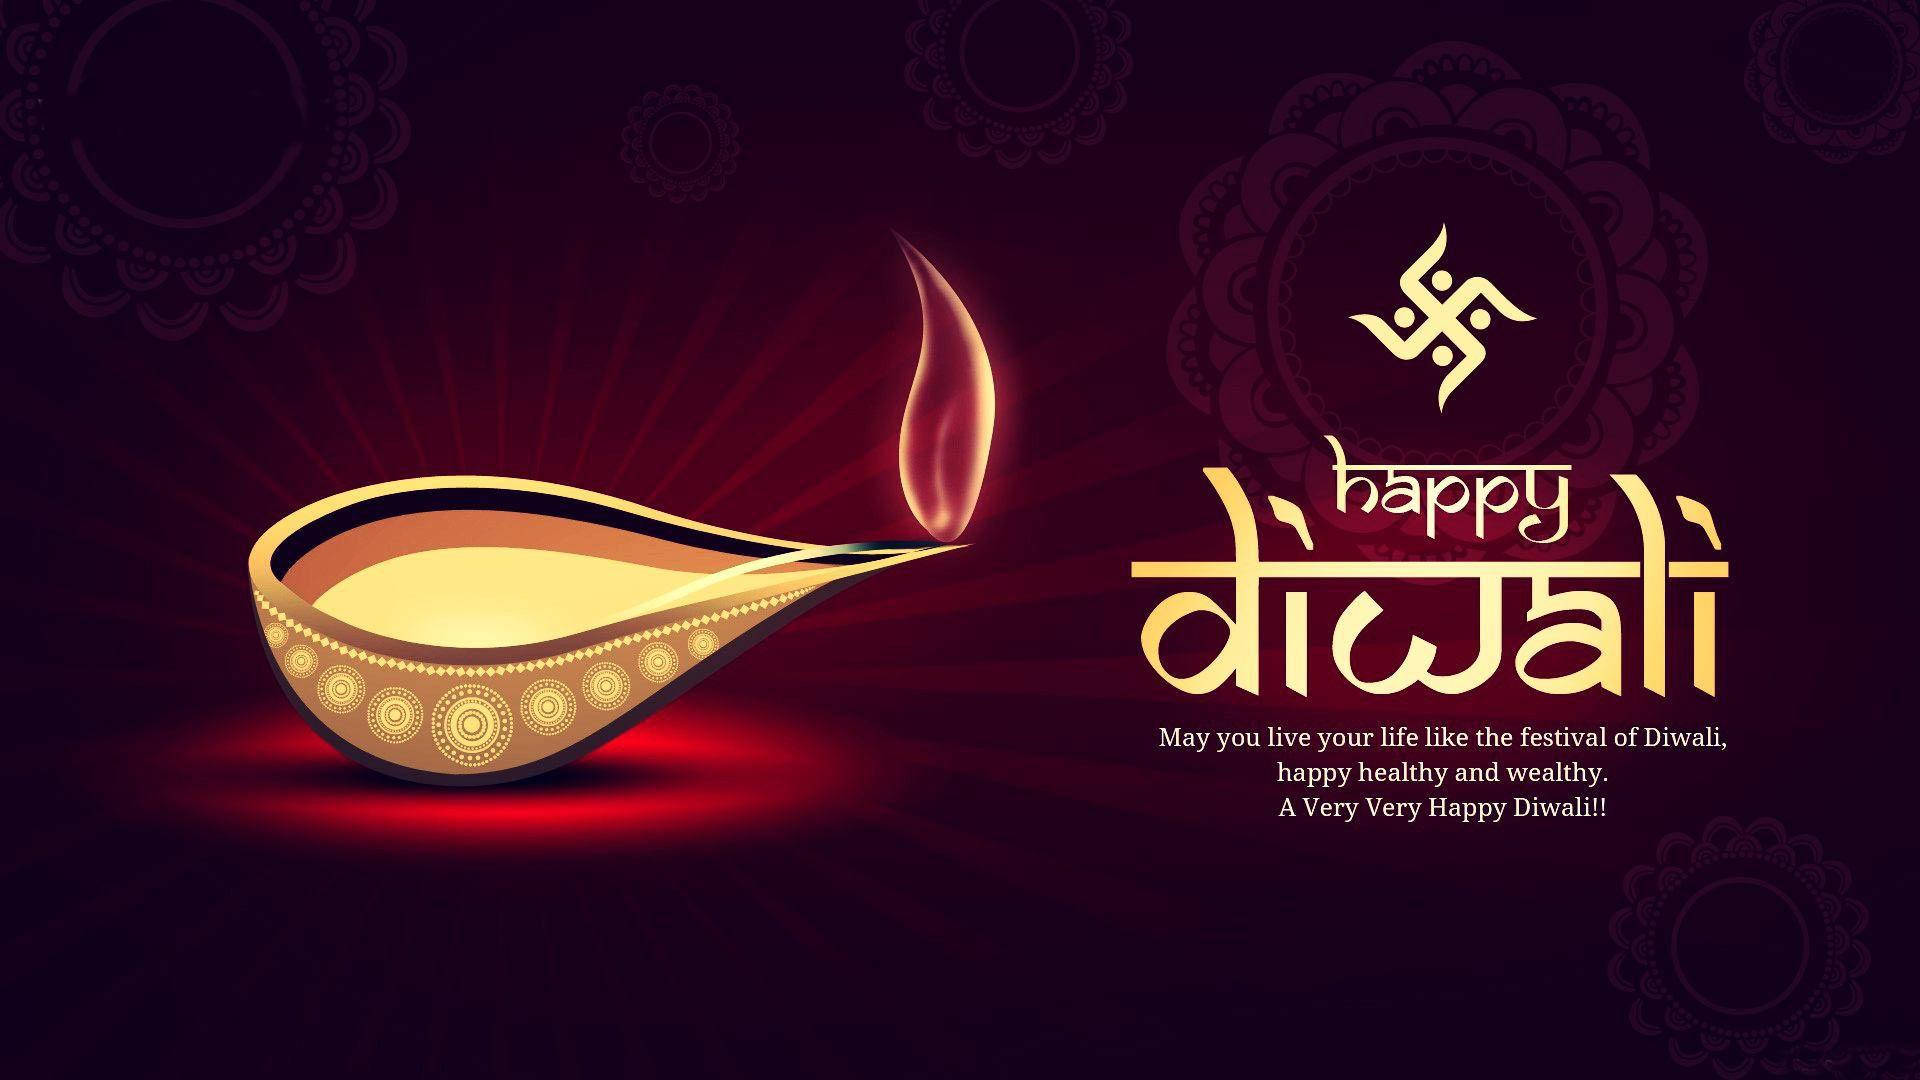 Happy Diwali With Stylised Hindu Letters